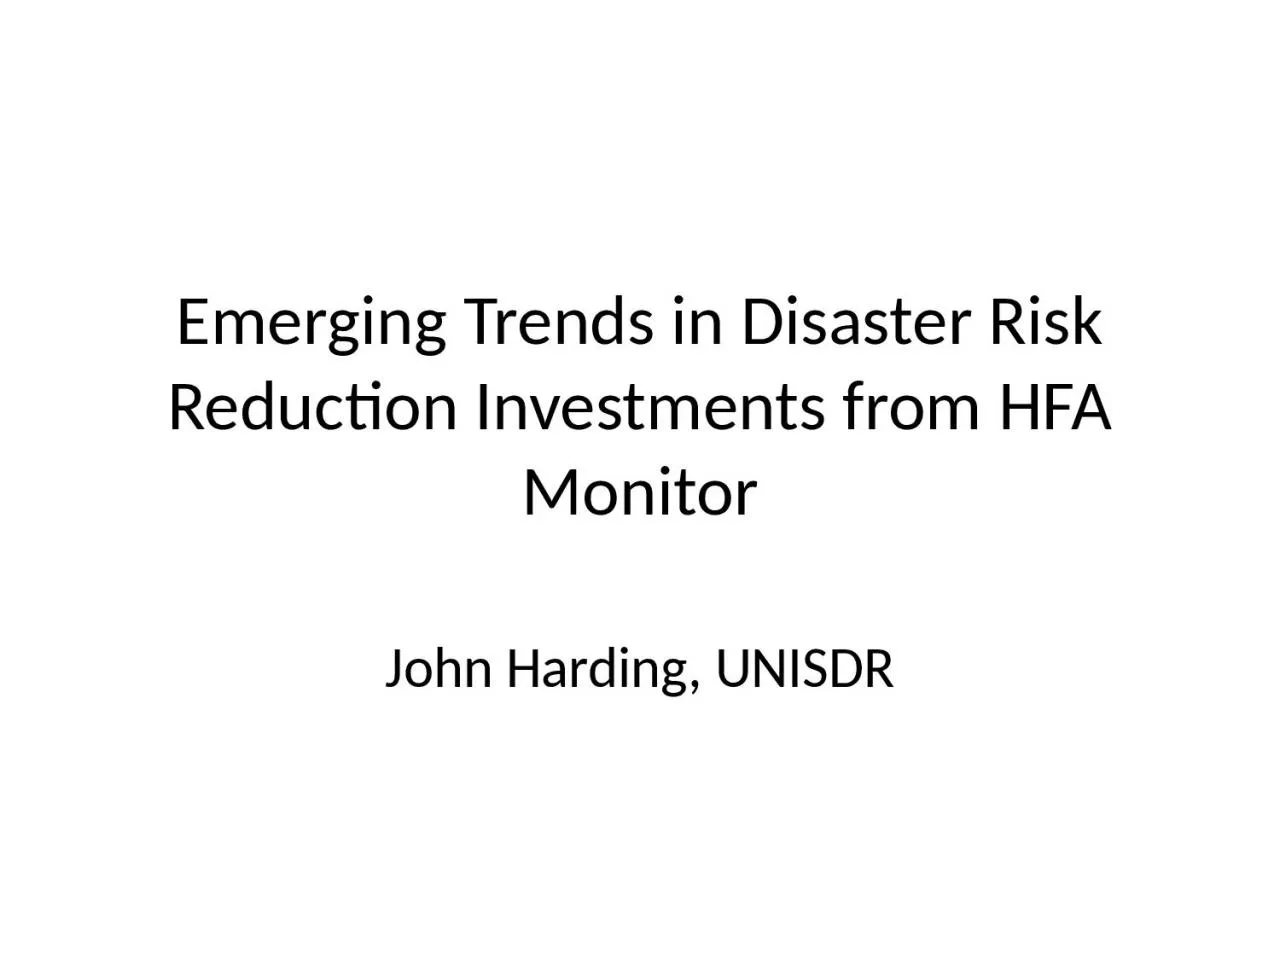 Emerging Trends in Disaster Risk Reduction Investments from HFA Monitor